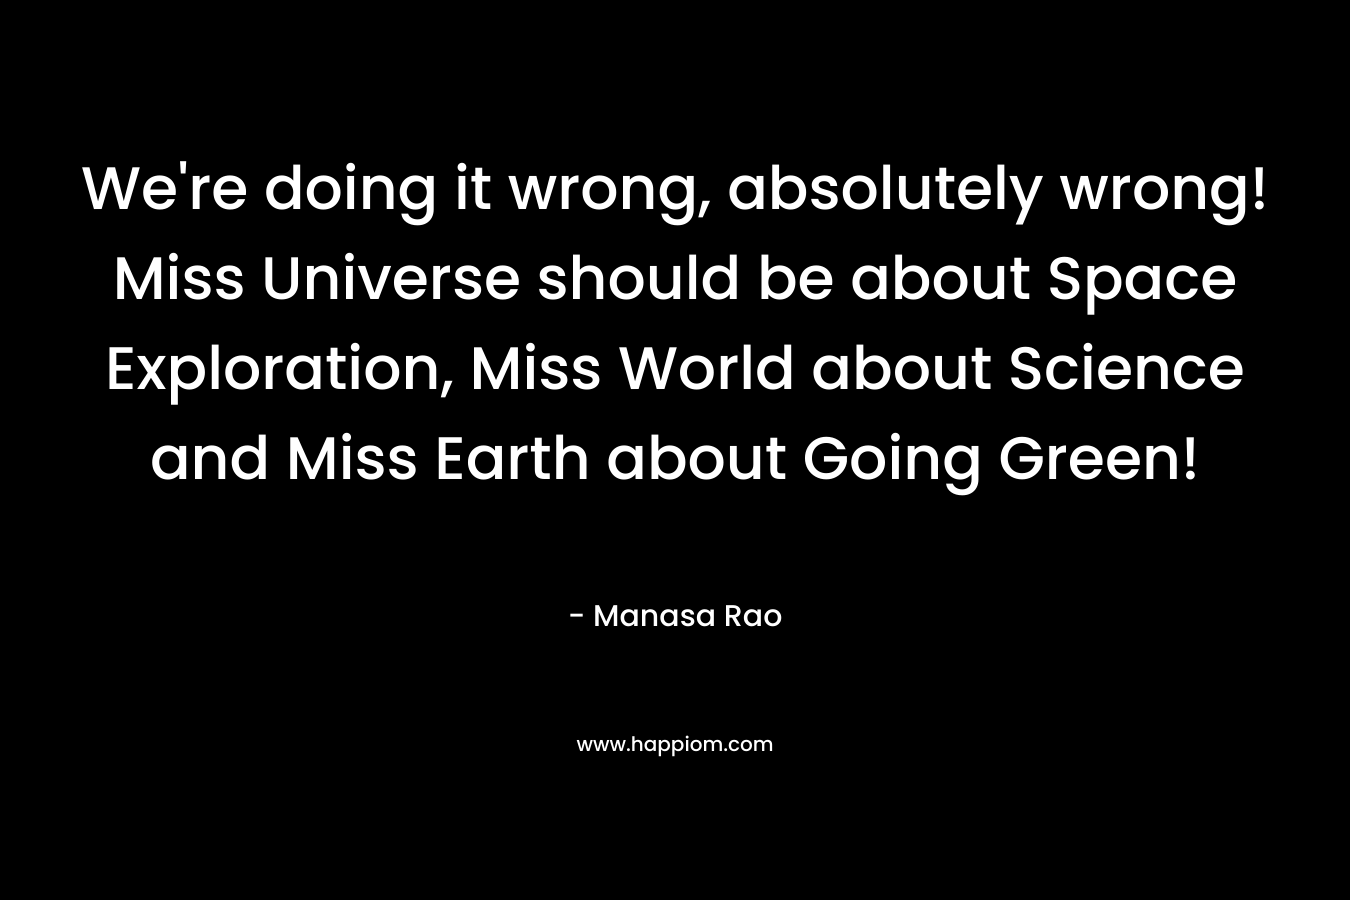 We're doing it wrong, absolutely wrong! Miss Universe should be about Space Exploration, Miss World about Science and Miss Earth about Going Green!